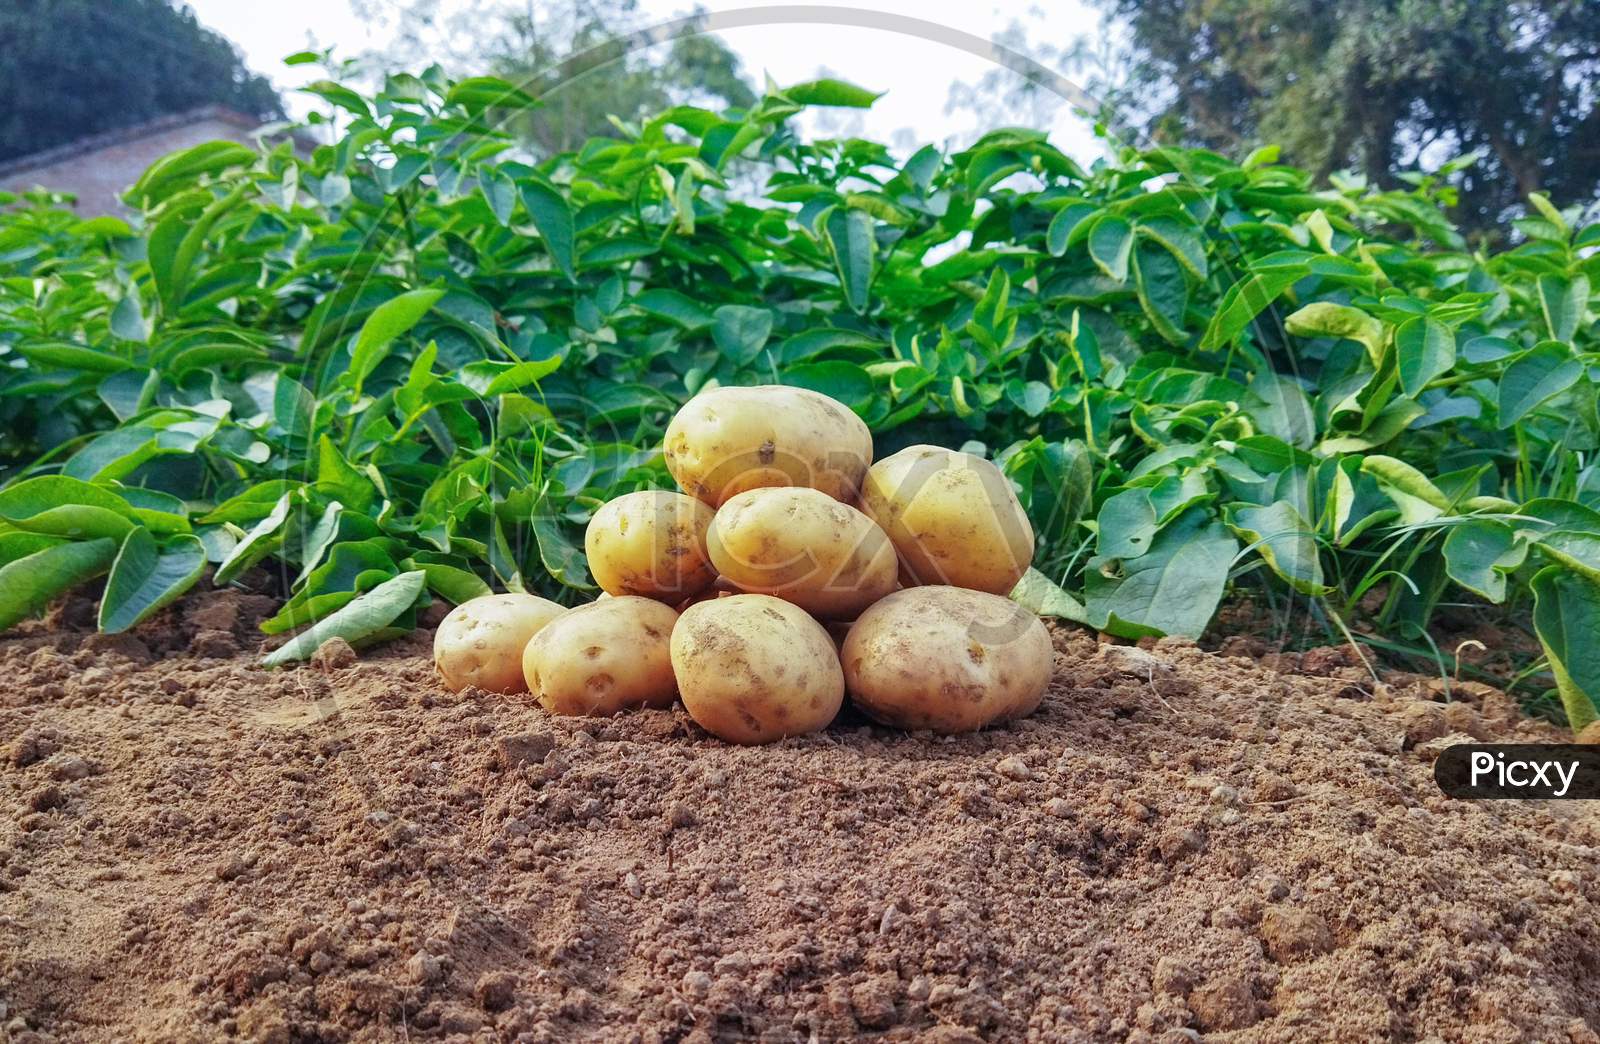 Potatoes On The Ground. Fresh Organic Potatoes In The Field